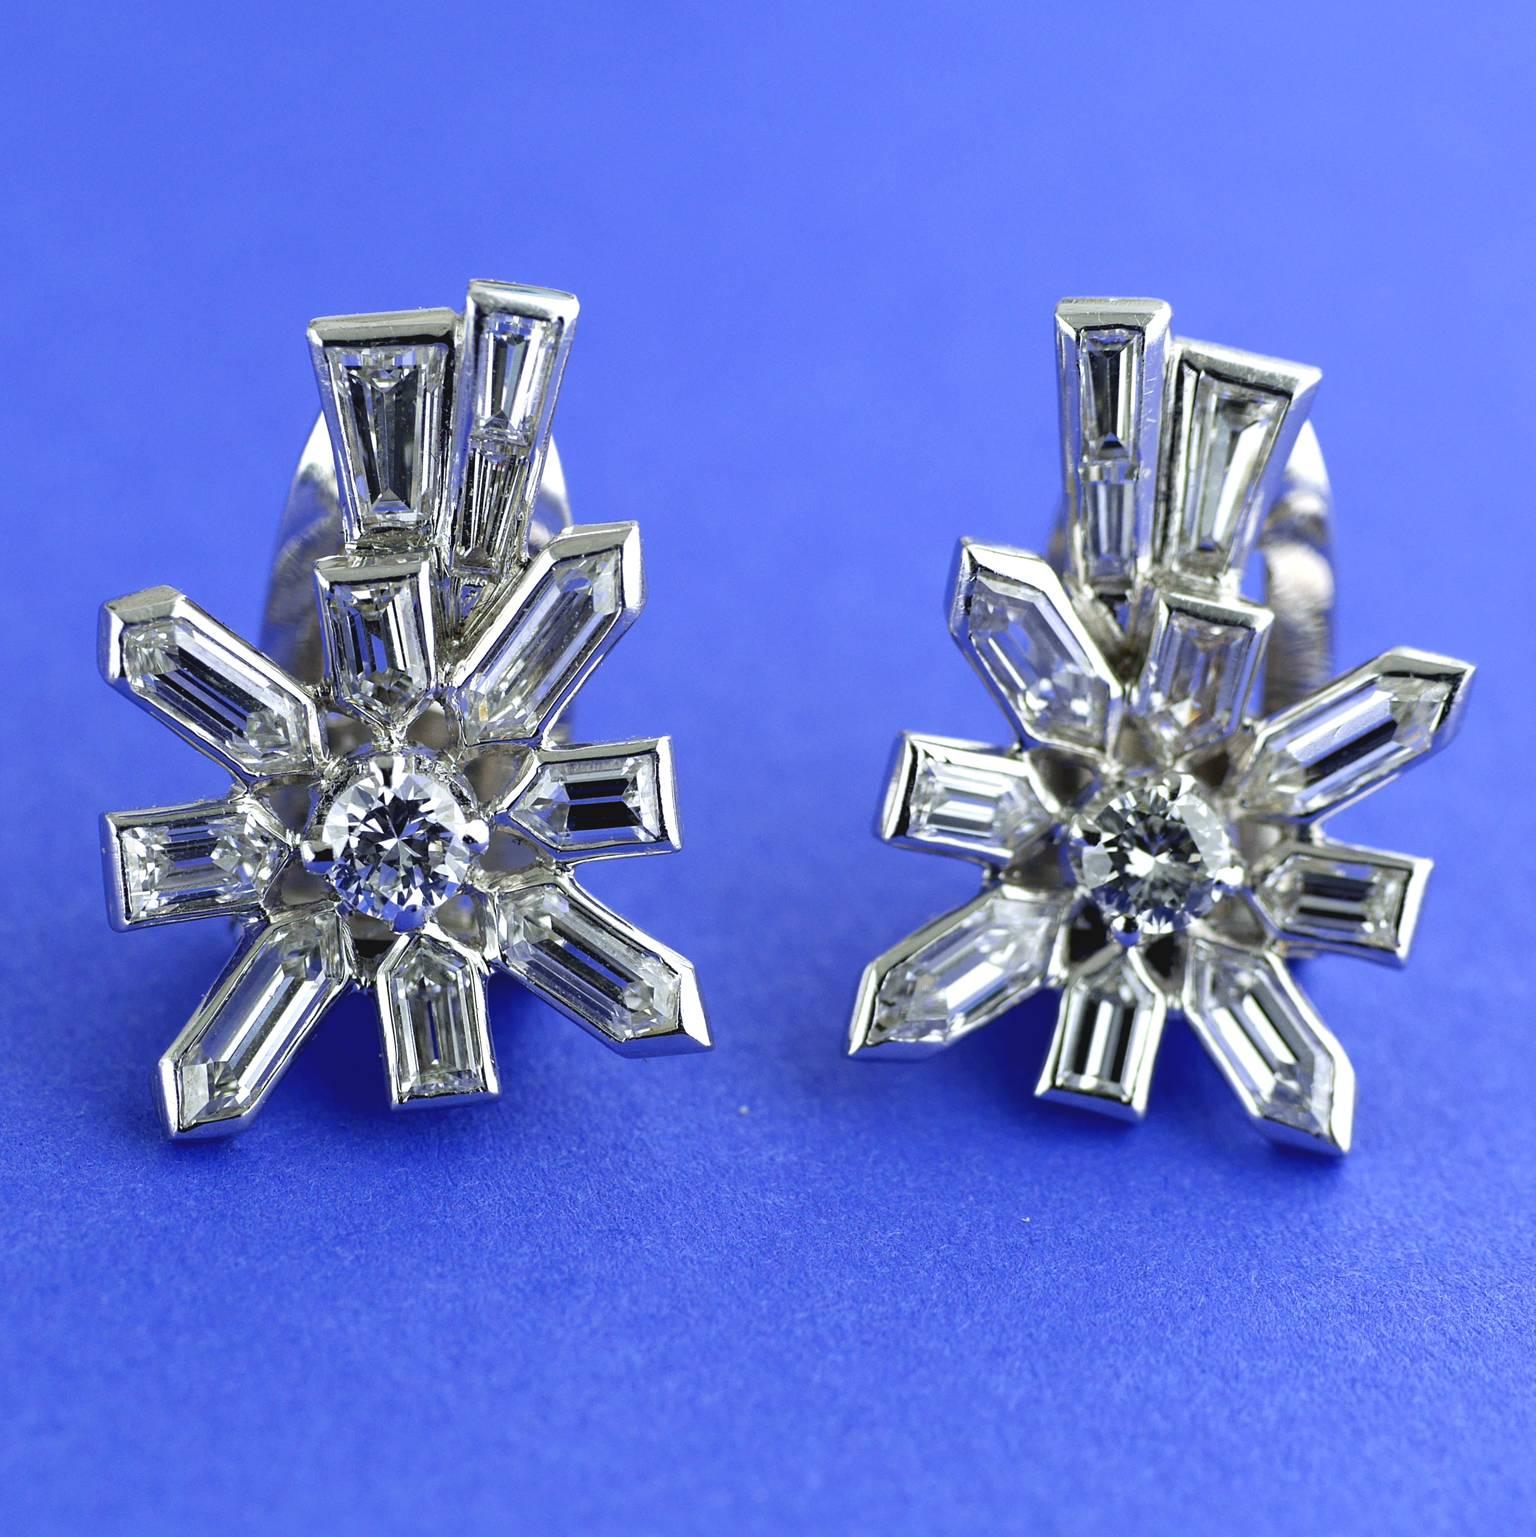 18ct white gold and diamond earrings made circa 1958.

This design was inspired by the space race of the 1950’s, when the first  man made satellite, the Sputnik, was  launched  into orbit. 

These  starburst shaped earrings are in 18ct white gold